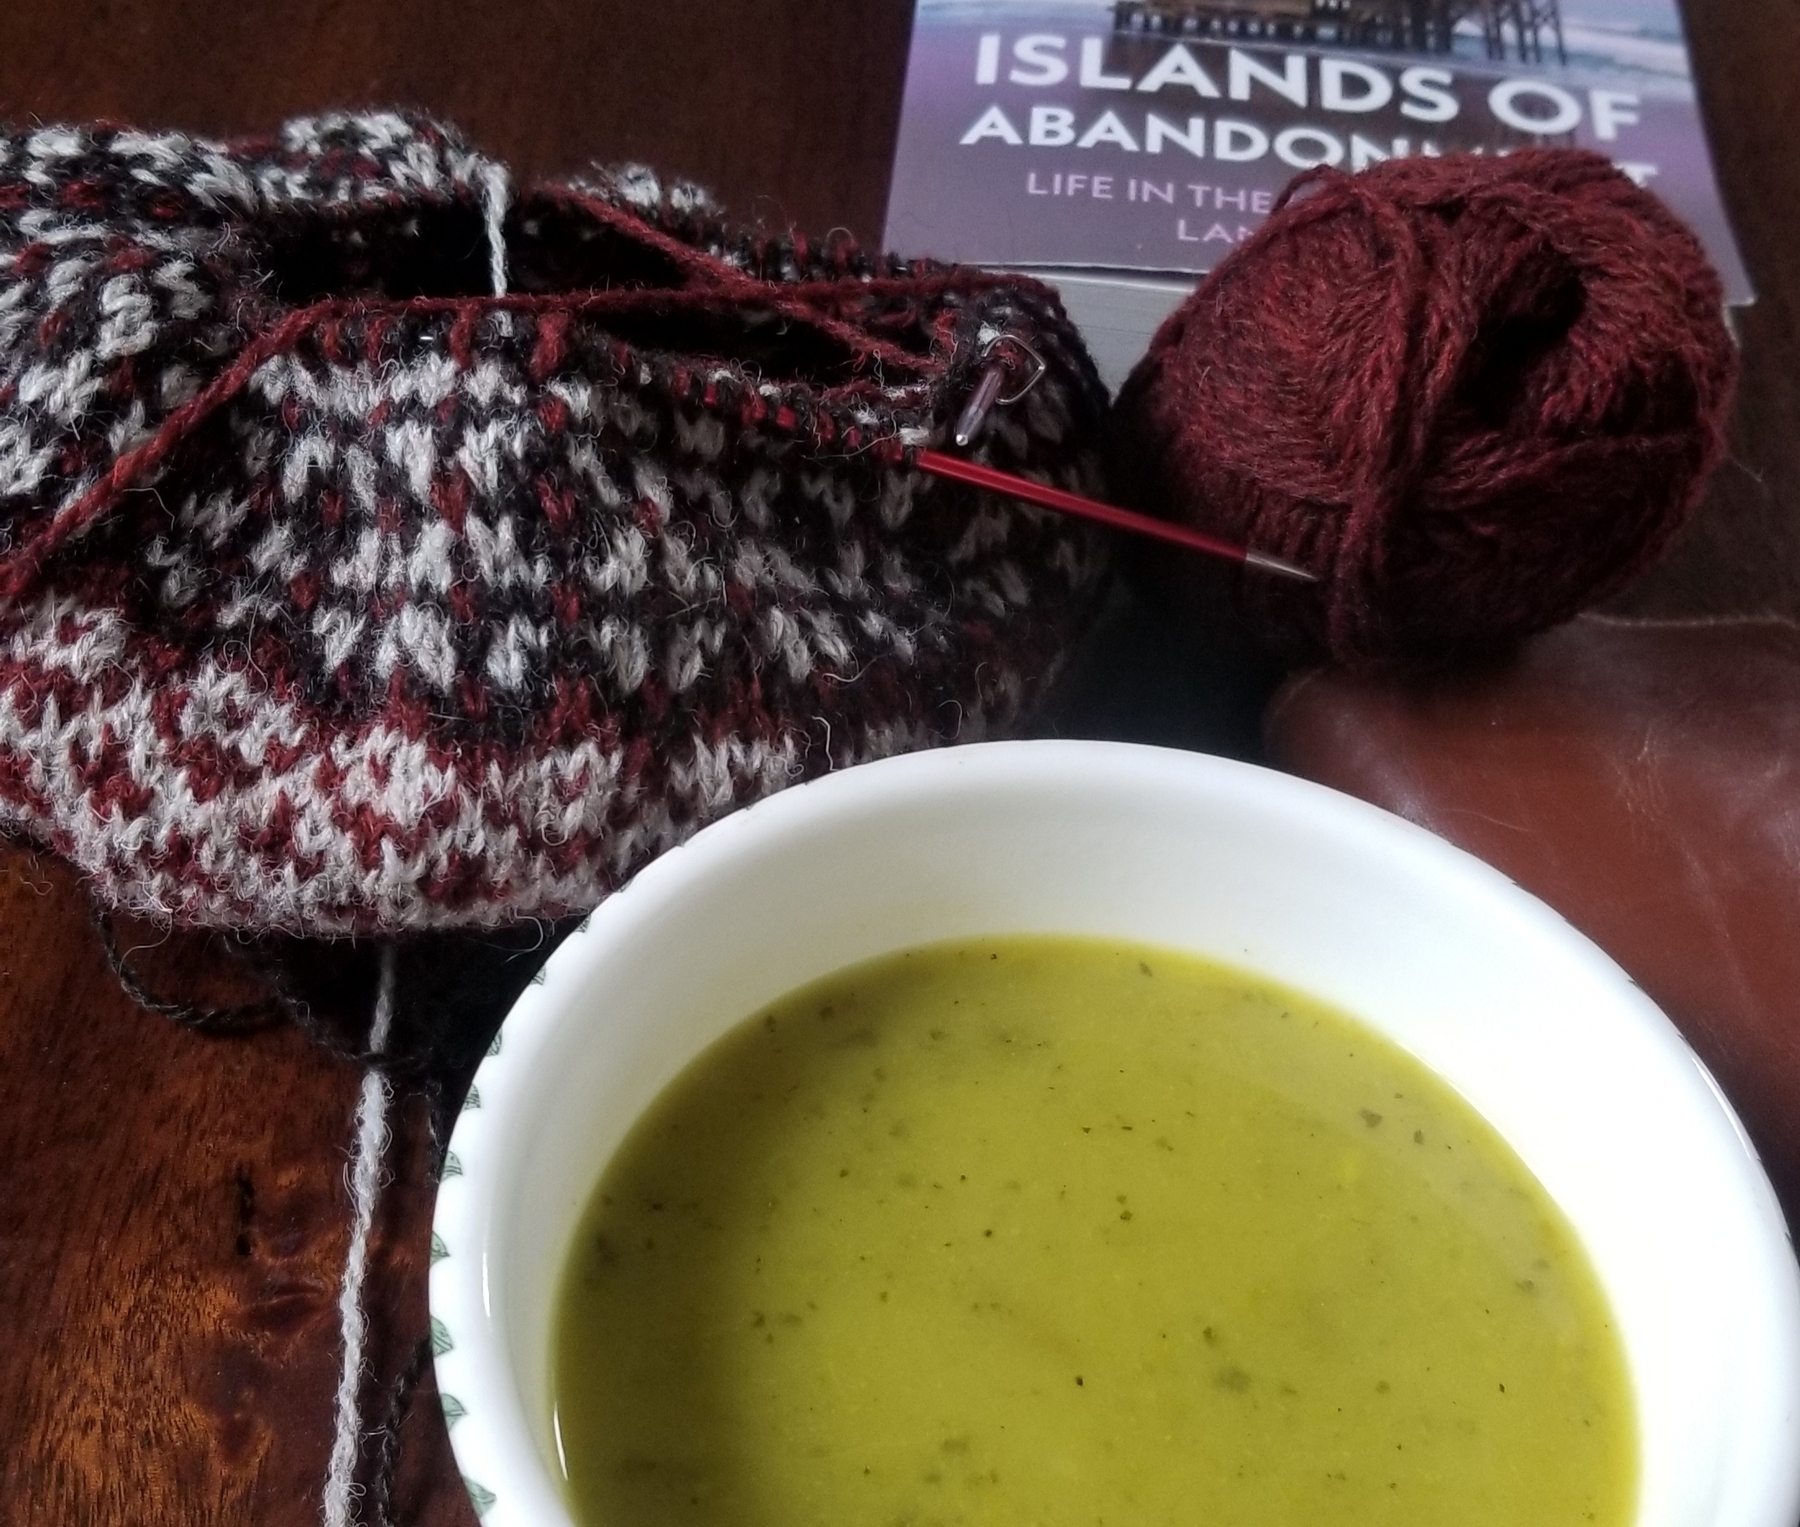 A half-knitted hat with a ball of yarn, a bowl of green pea soup, and a paperback copy of 'Islands of Abandonment'